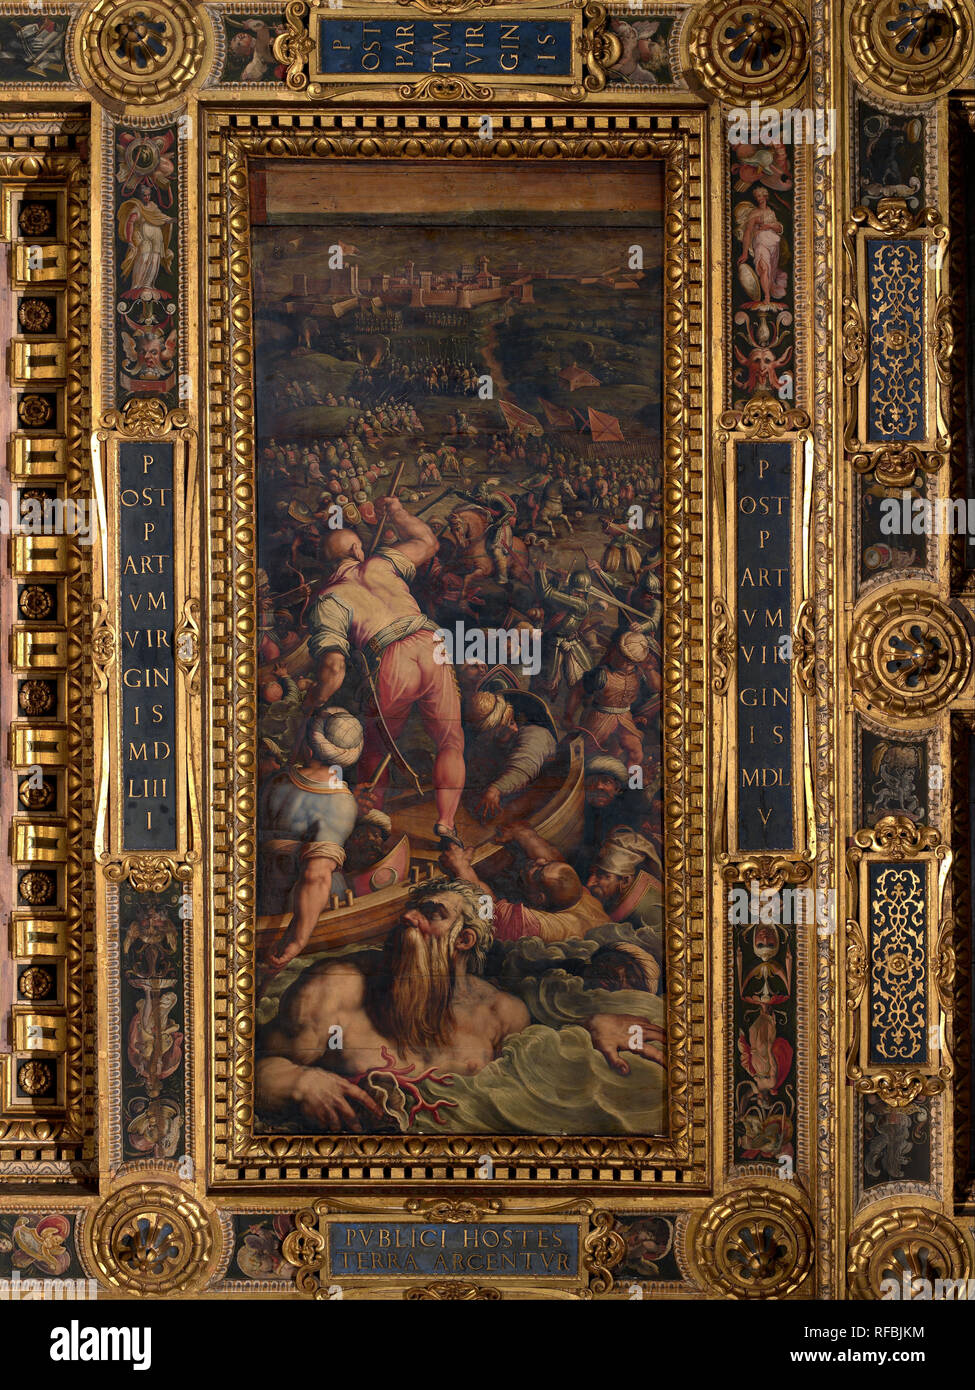 Rout of the Turks at Piombino. Date/Period: 1563 - 1565. Oil painting on wood. Height: 540 mm (21.25 in); Width: 250 mm (9.84 in). Author: Giorgio Vasari. VASARI, GIORGIO. Stock Photo